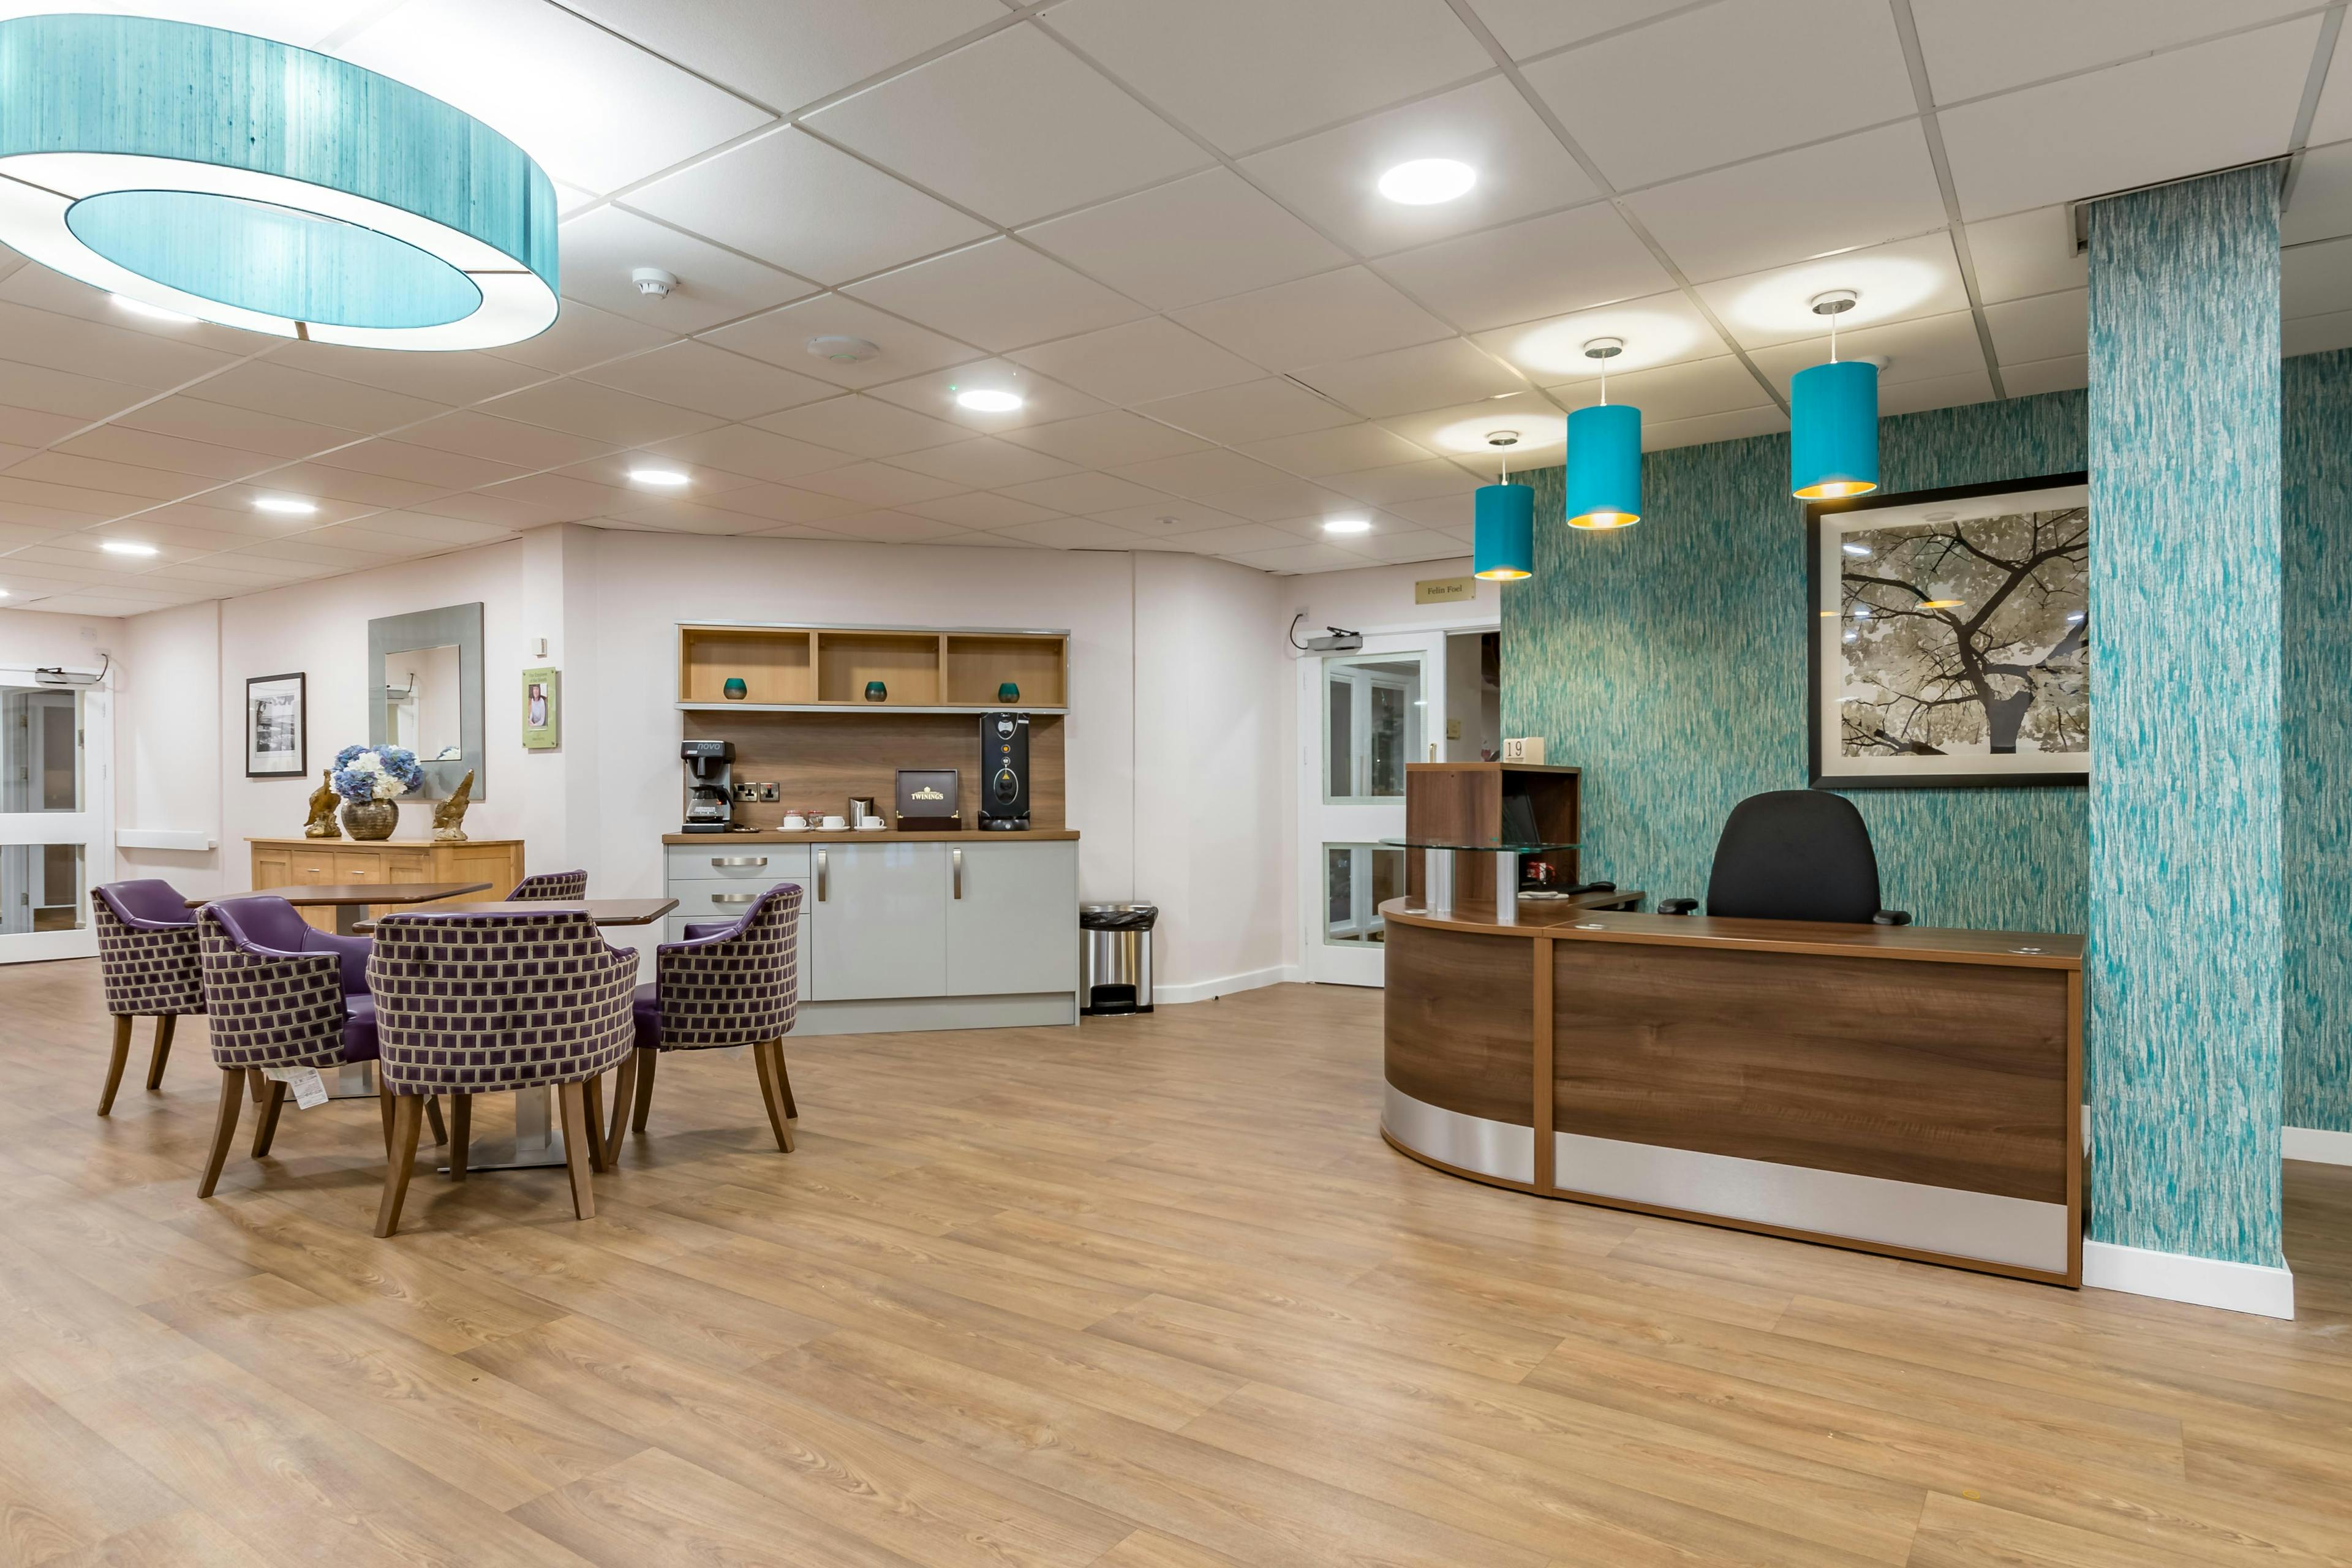 Dining area of Hafan-Y-Coed Care Home in Llanelli, Wales